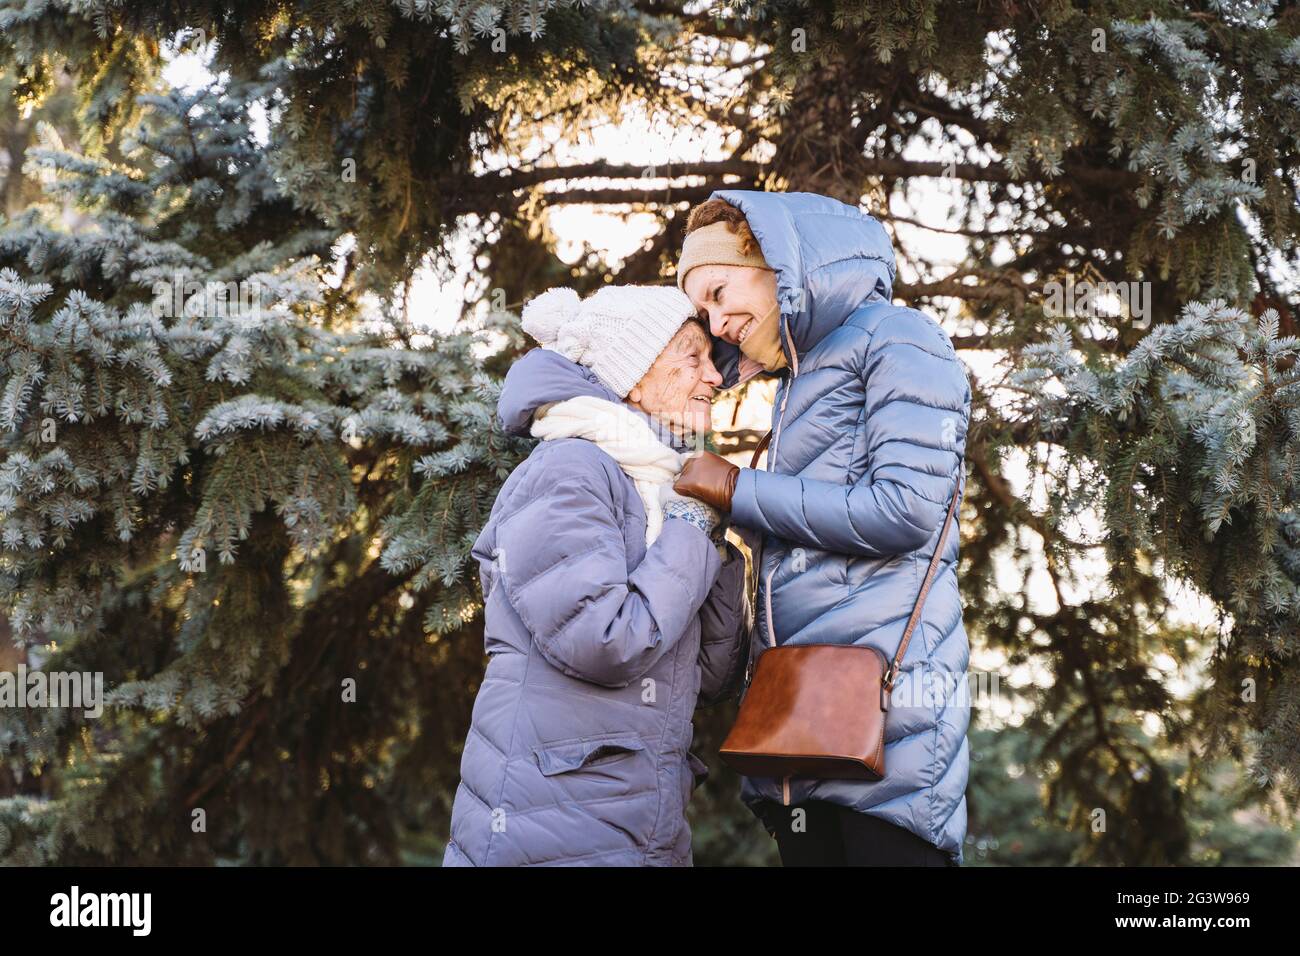 Concept of happy family, old age, emotions, senior care in retirement age. Active senior grandmother and adult daughter hugging Stock Photo